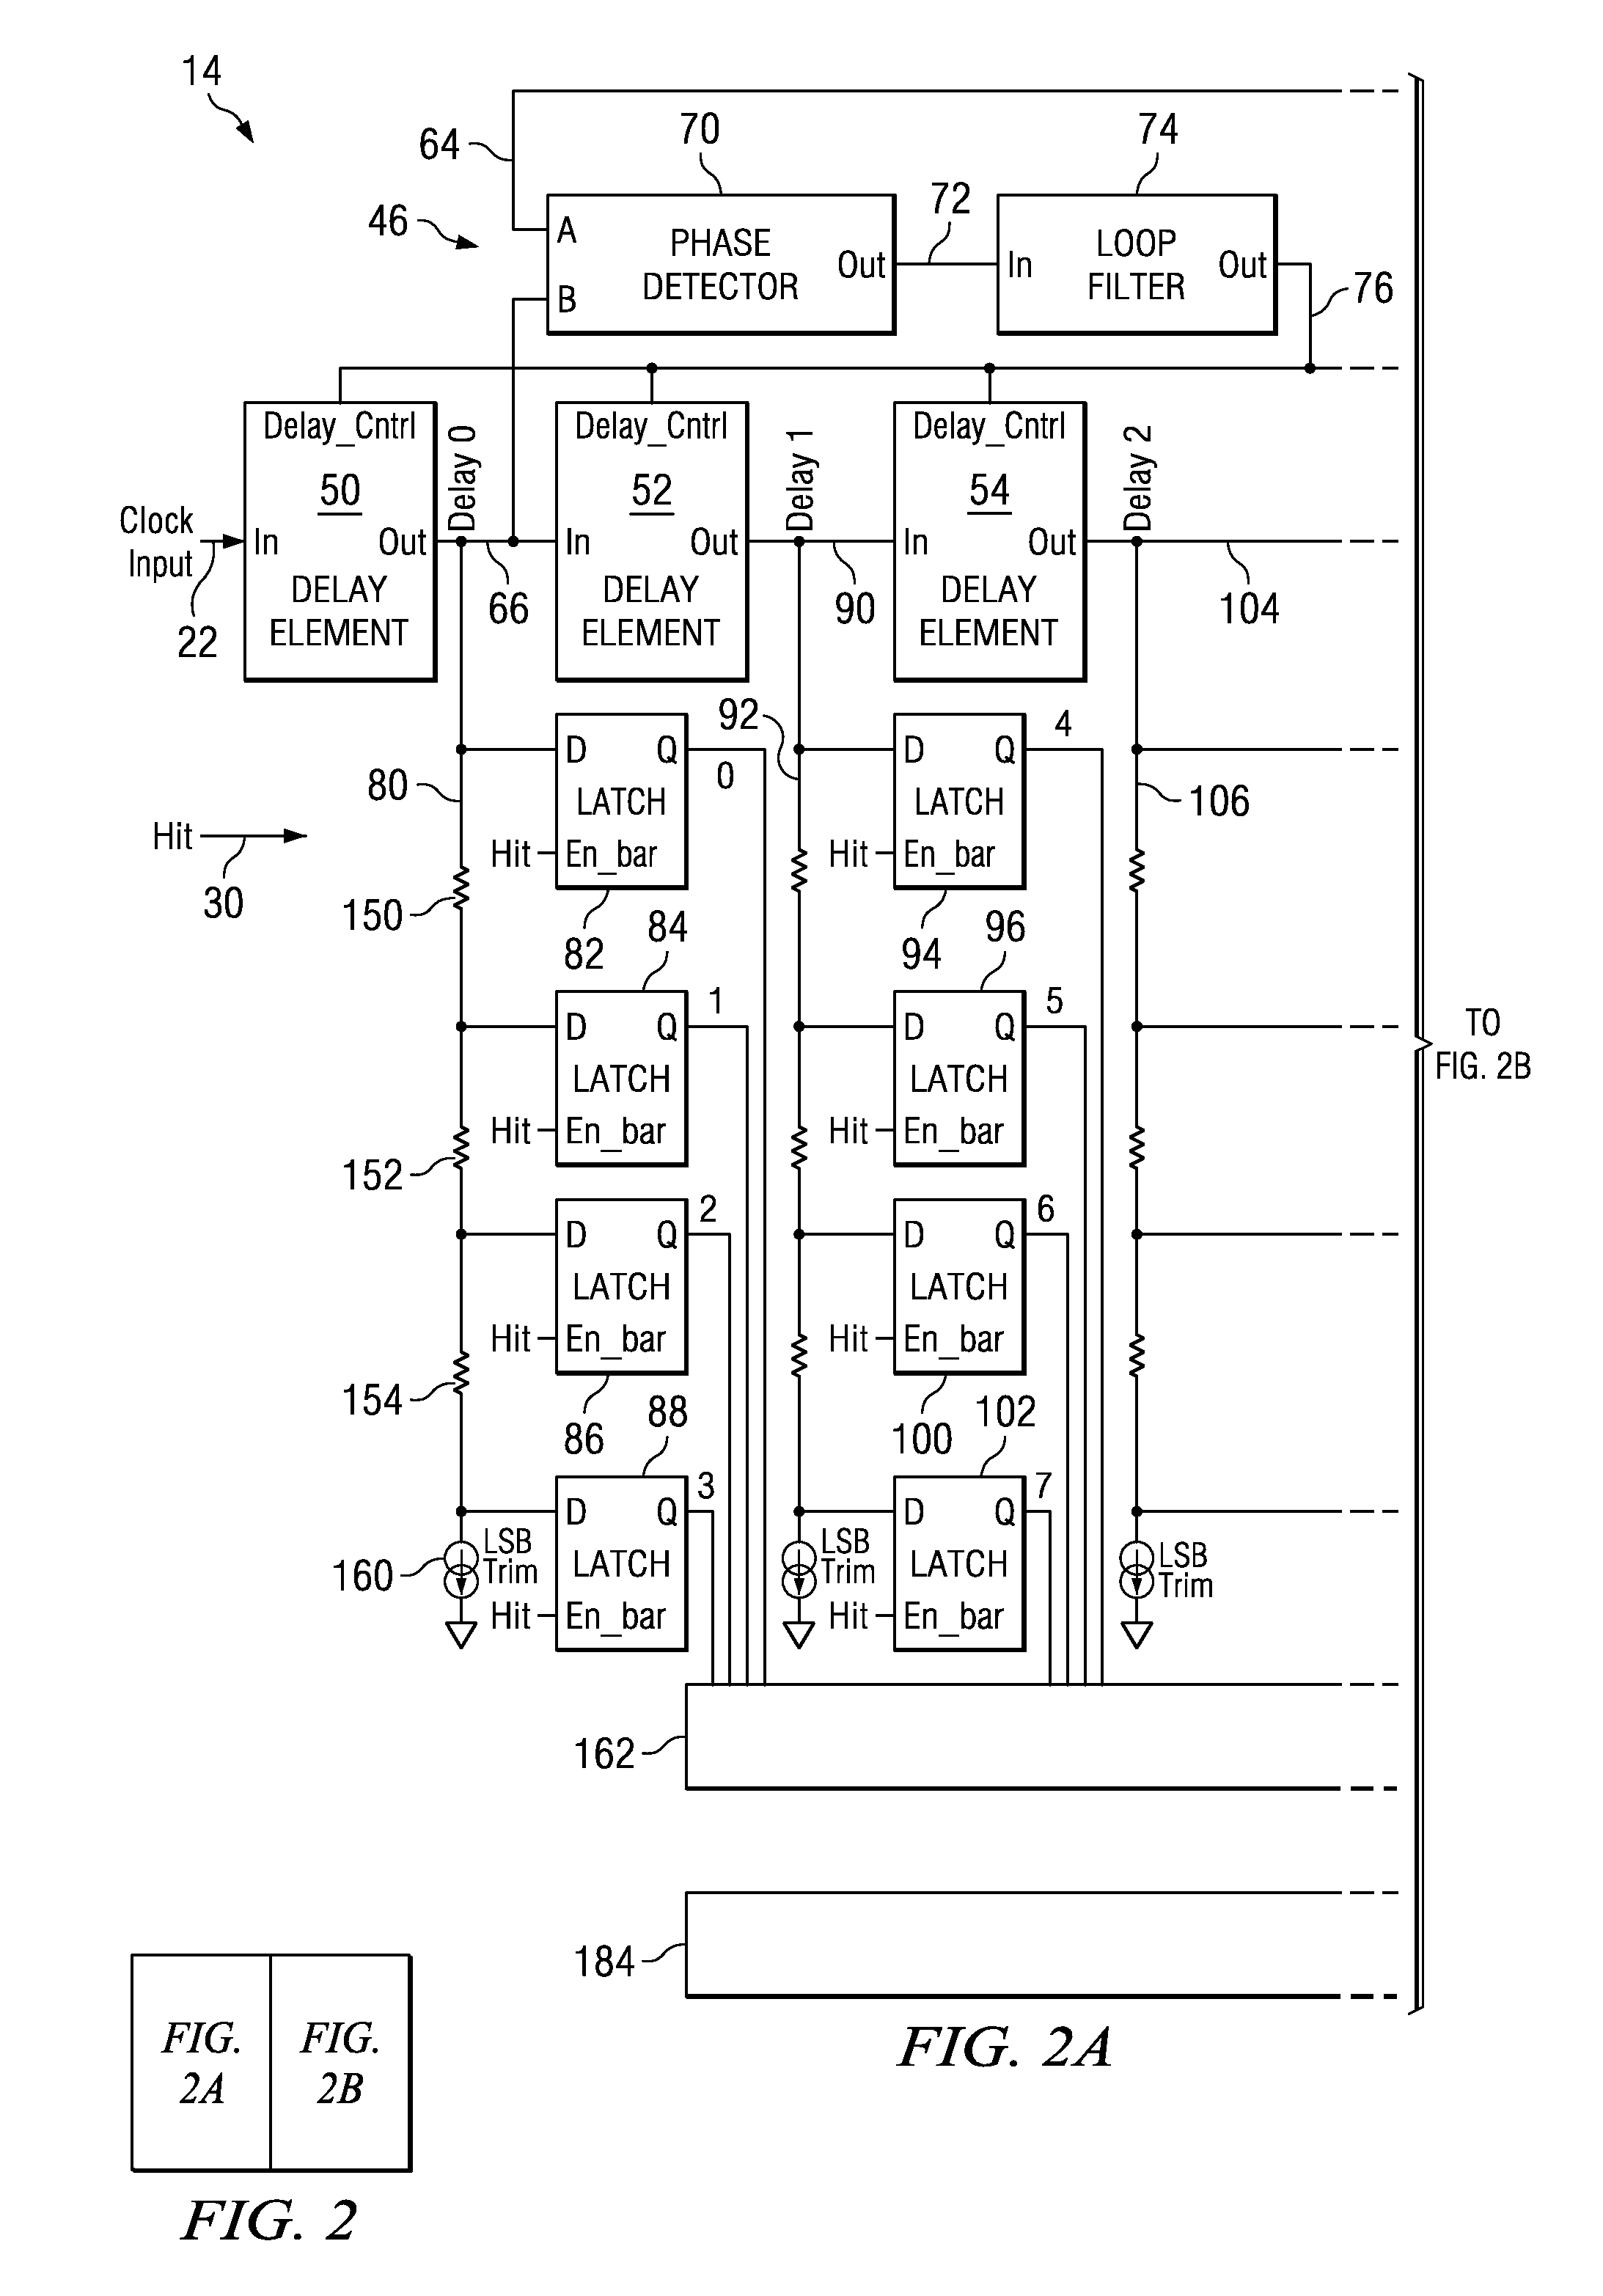 Method and Apparatus for Synchronizing Time Stamps